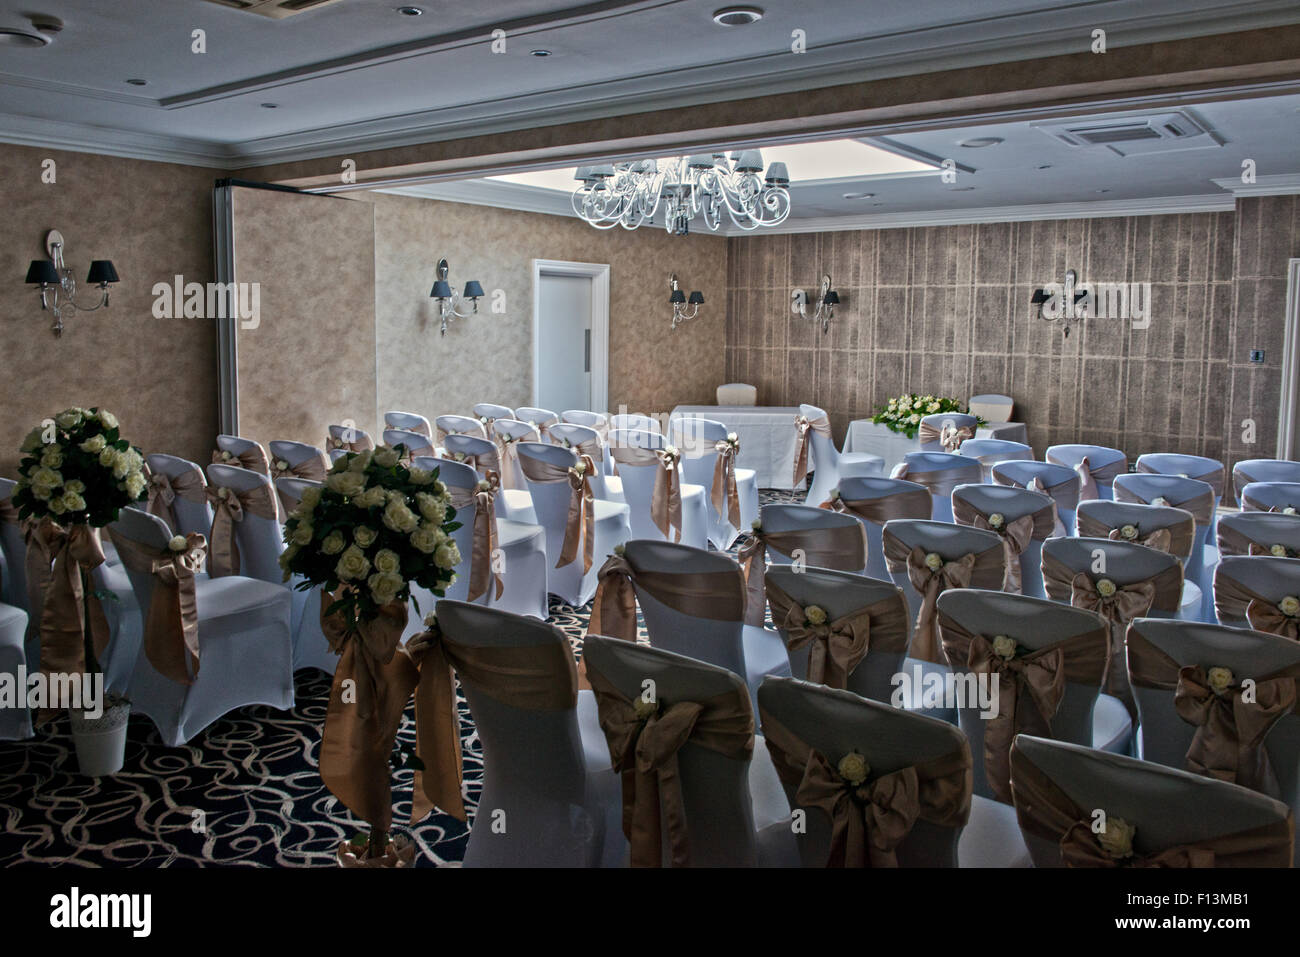 The wedding venue showing a high attention to detail and awaiting the actual ceremony. Stock Photo